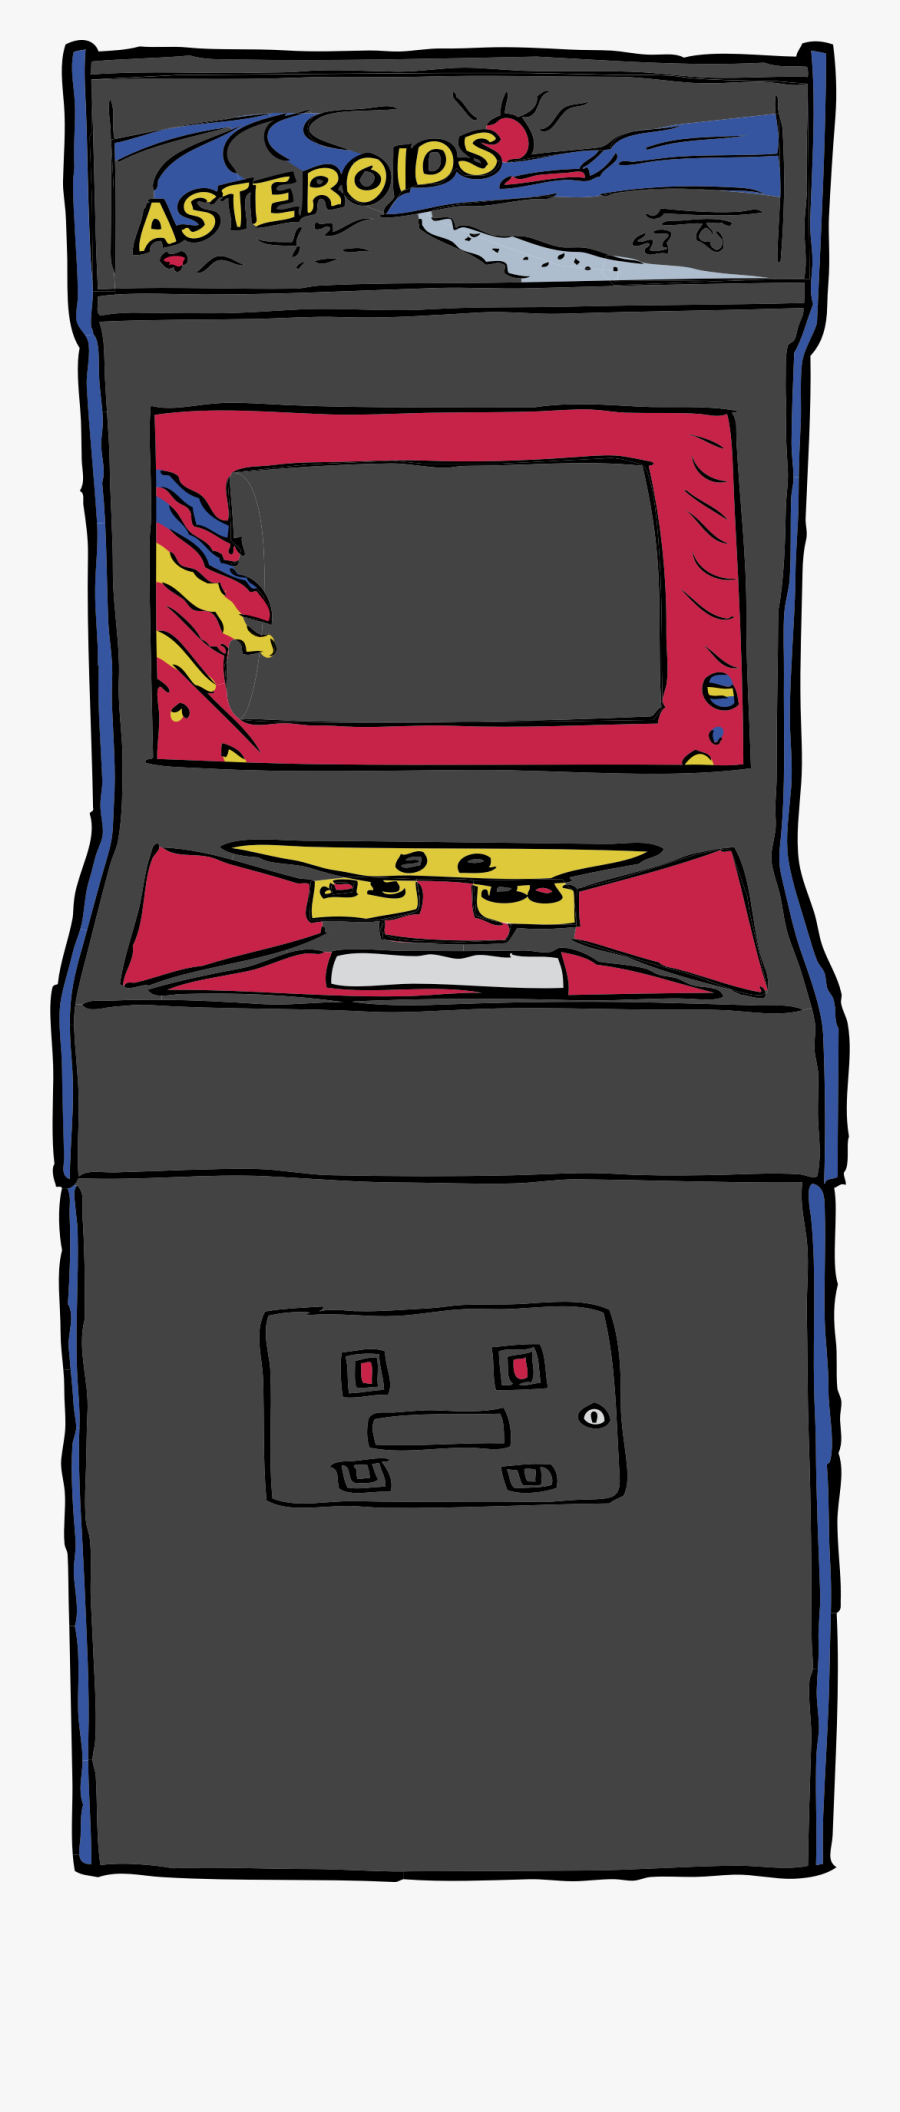 Thumb Image - Arcade Game Clipart Free, Transparent Clipart